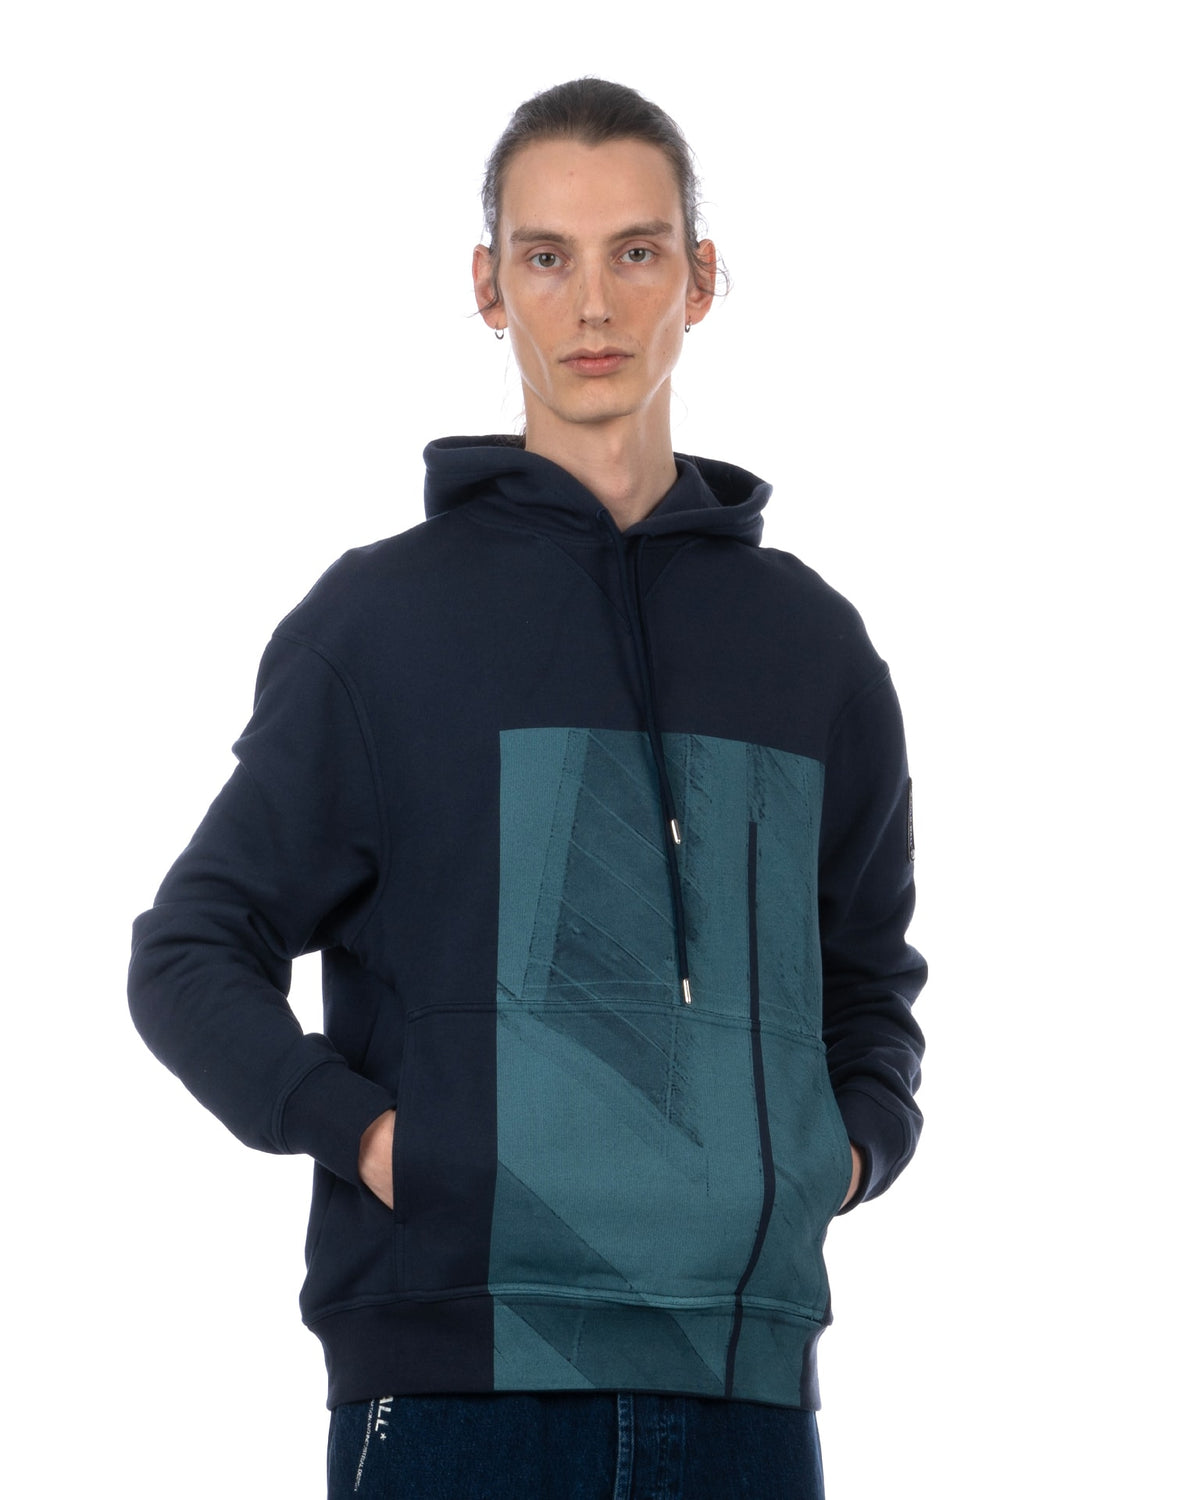 A-COLD-WALL* | Strand Hoodie Navy - Concrete